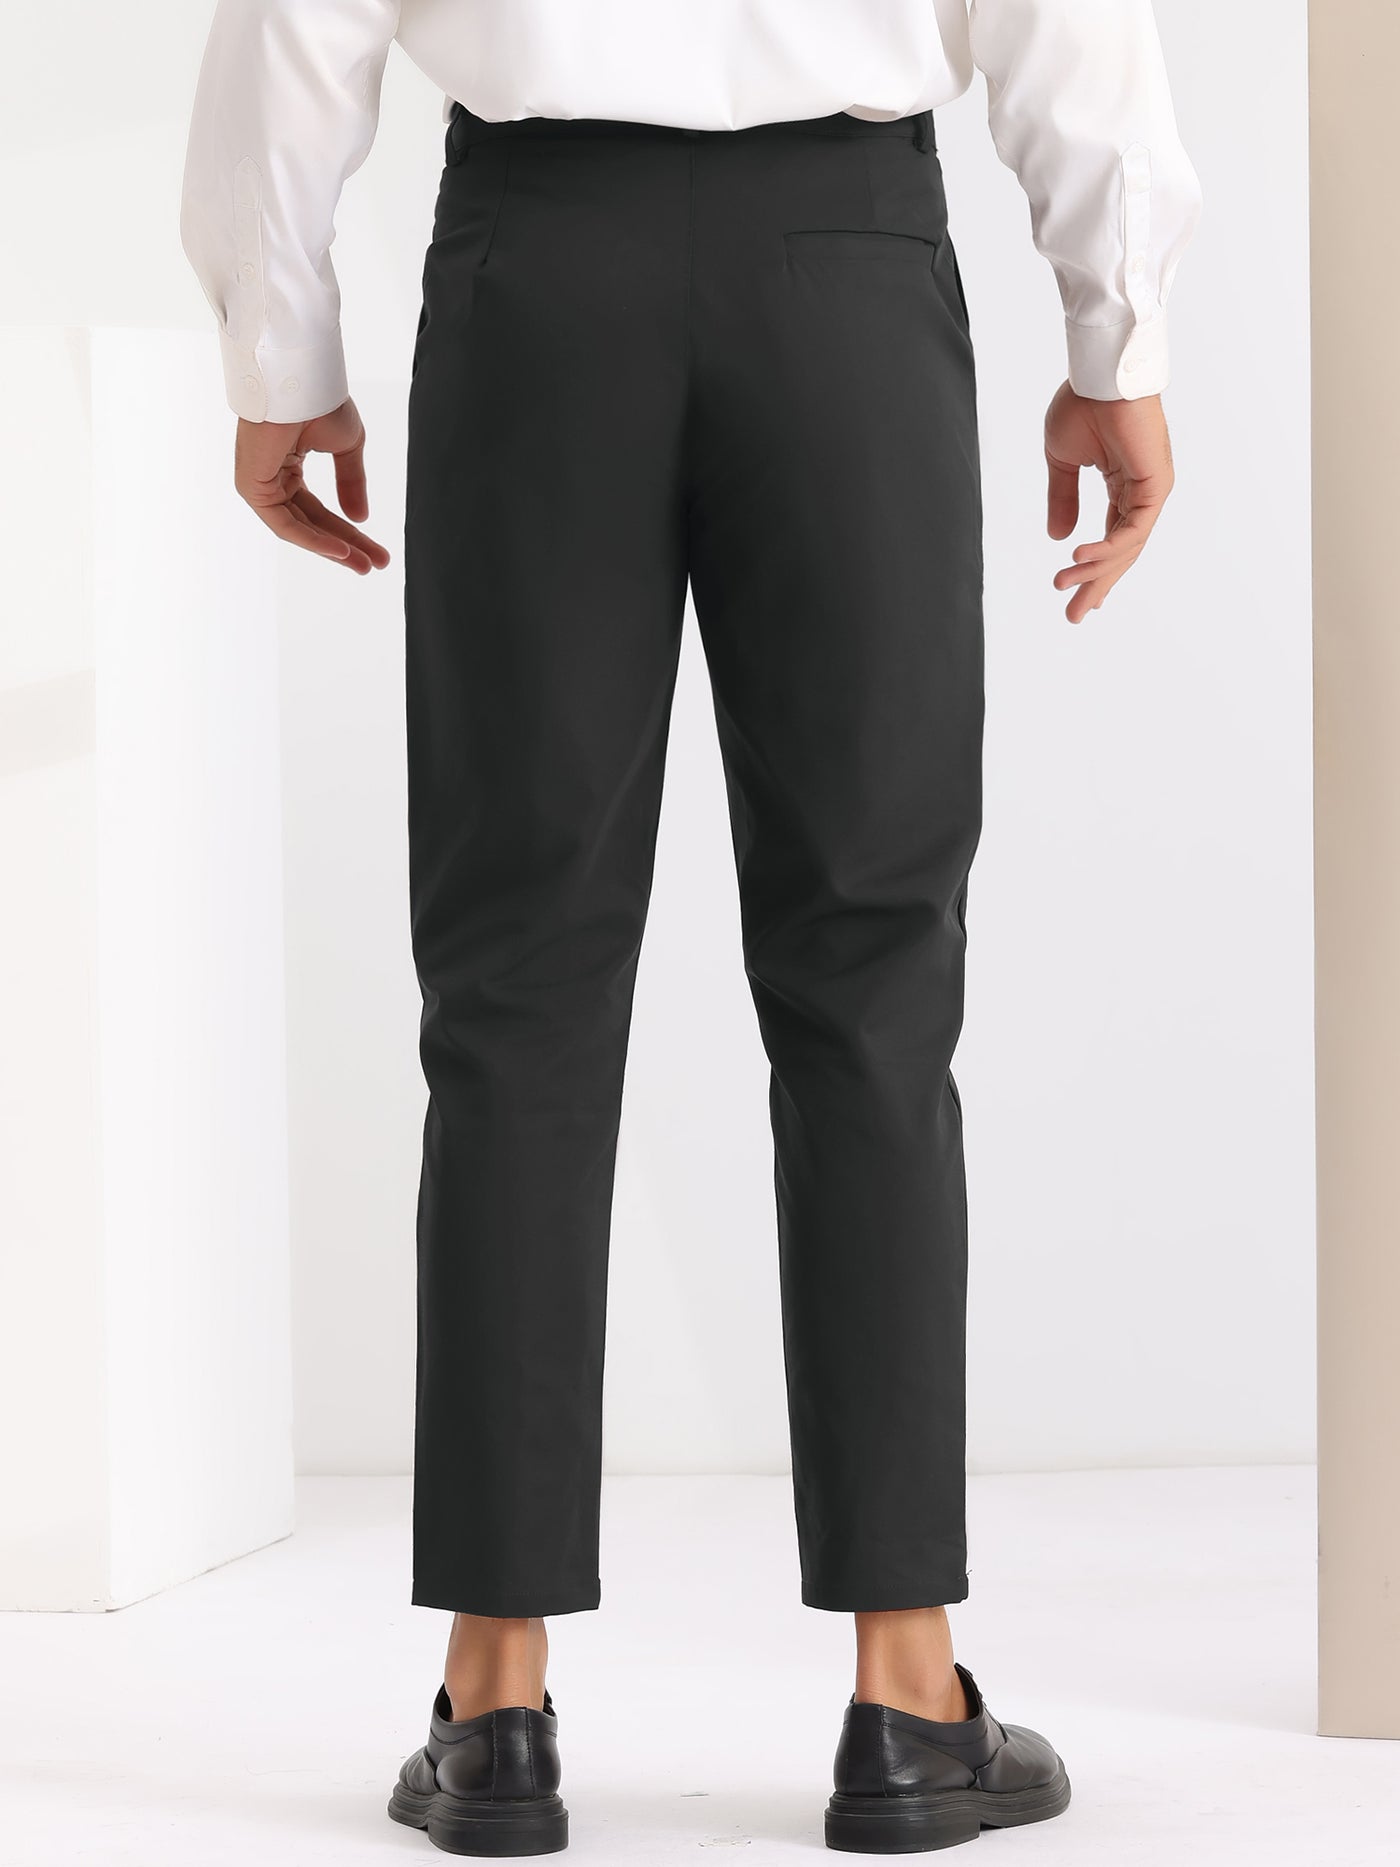 Bublédon Slim Fit Flat Front Work Office Tapered Chino Dress Pants